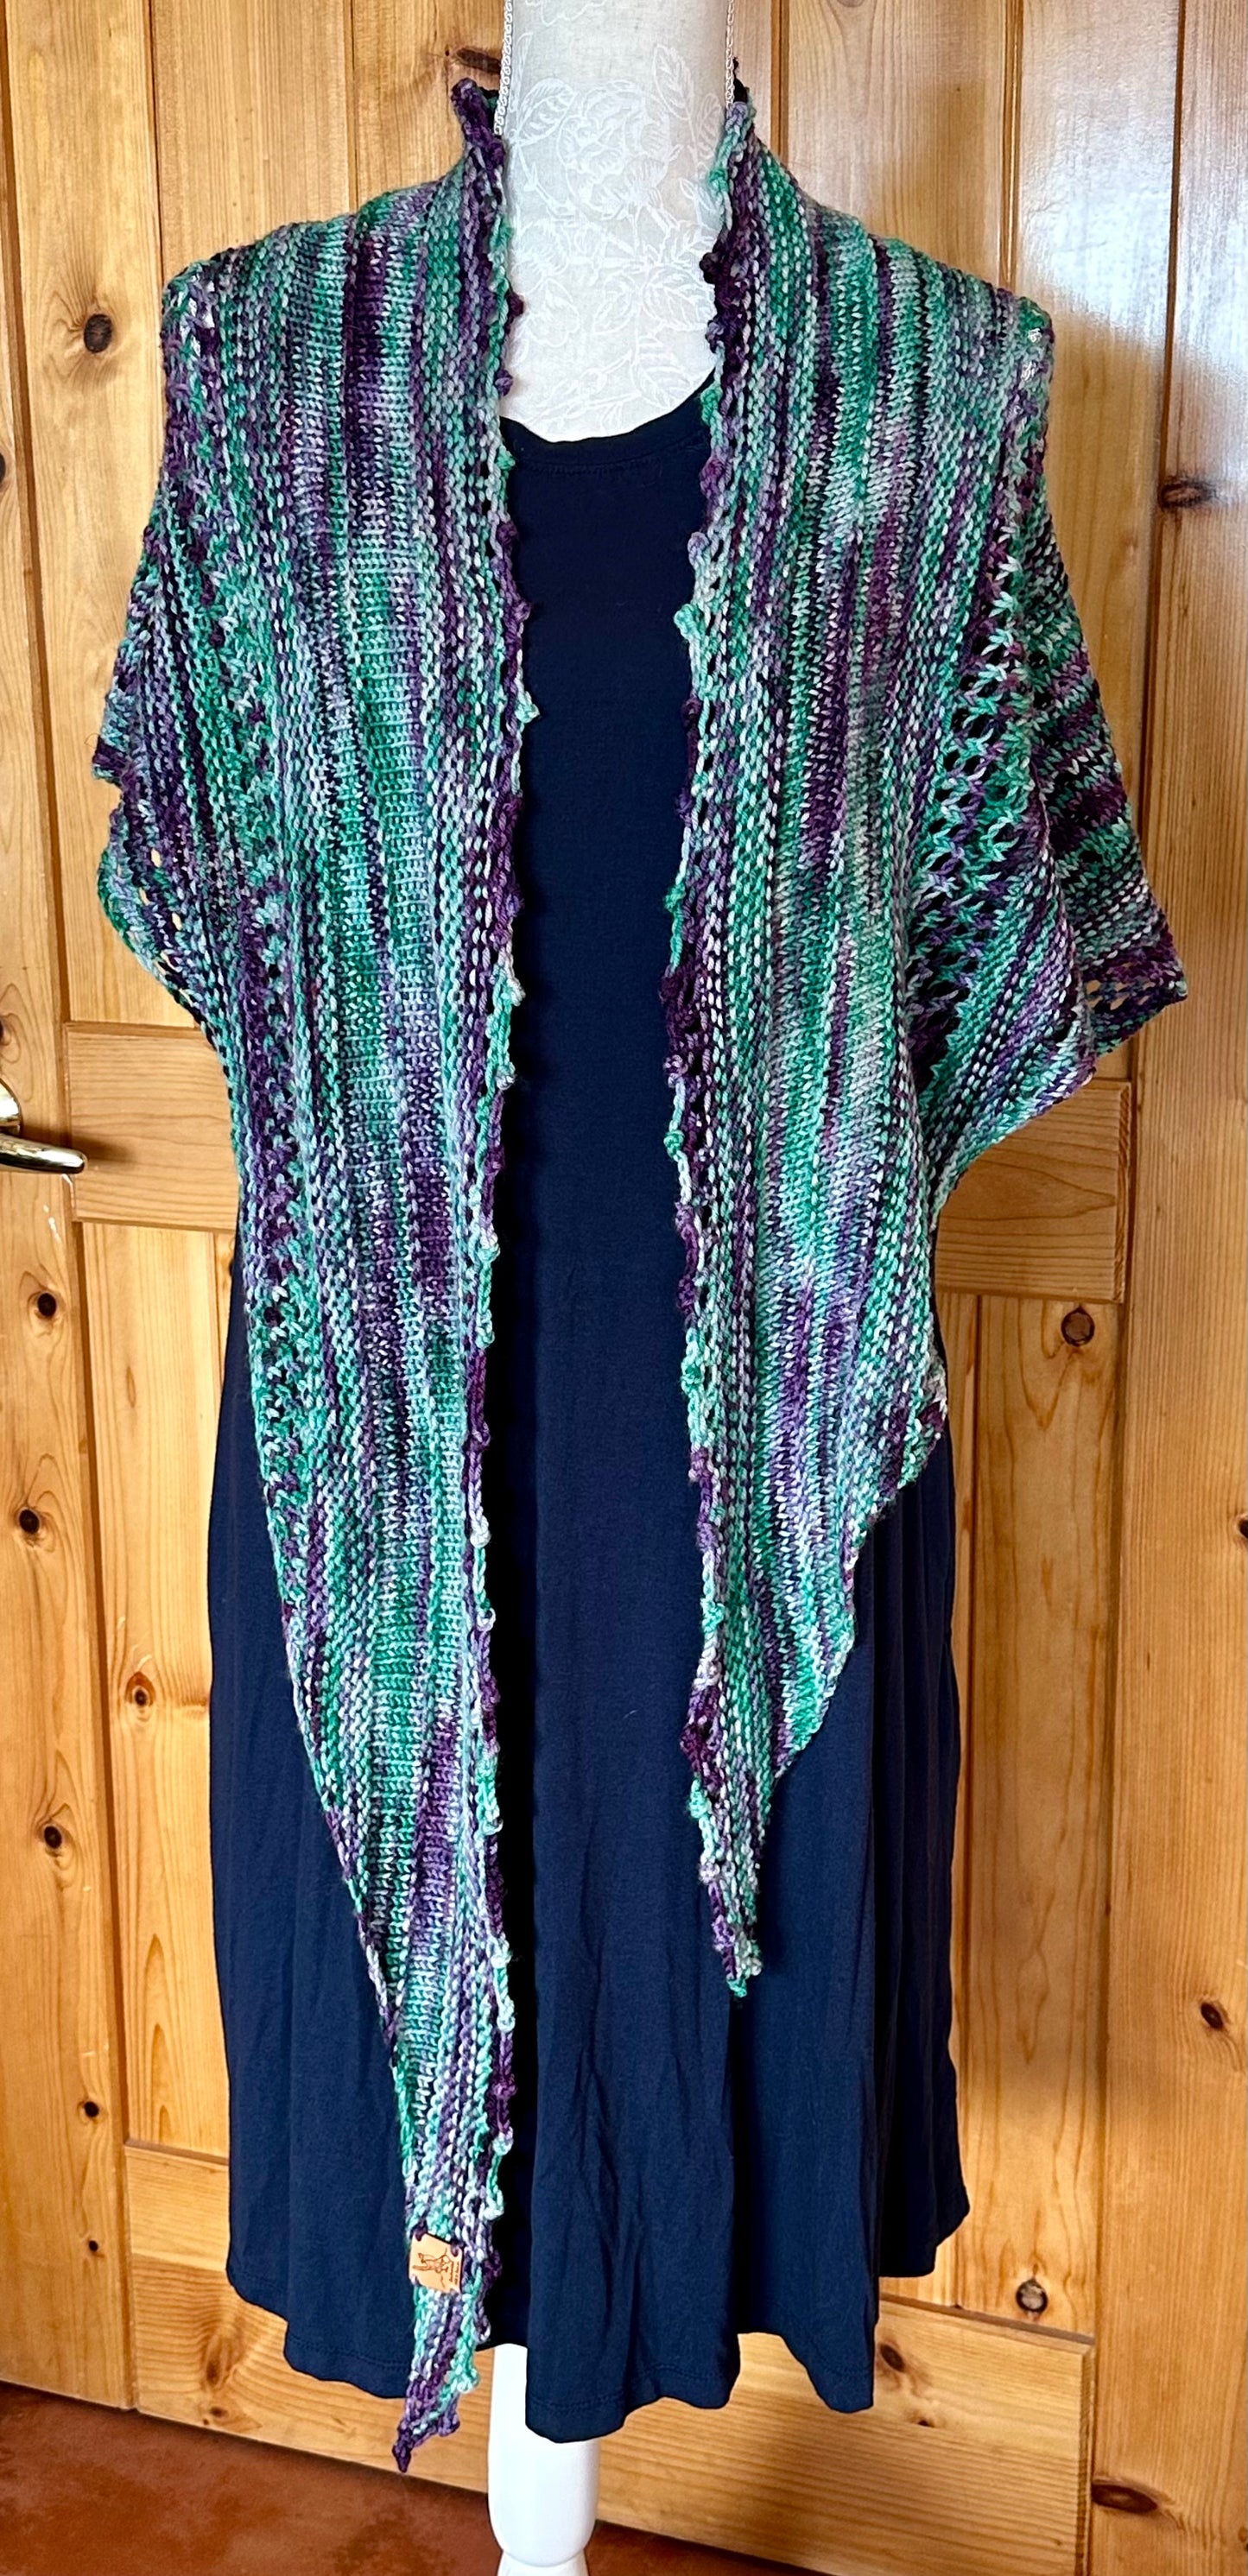 Shawl/Wrap/Lace Scarf in Peacock